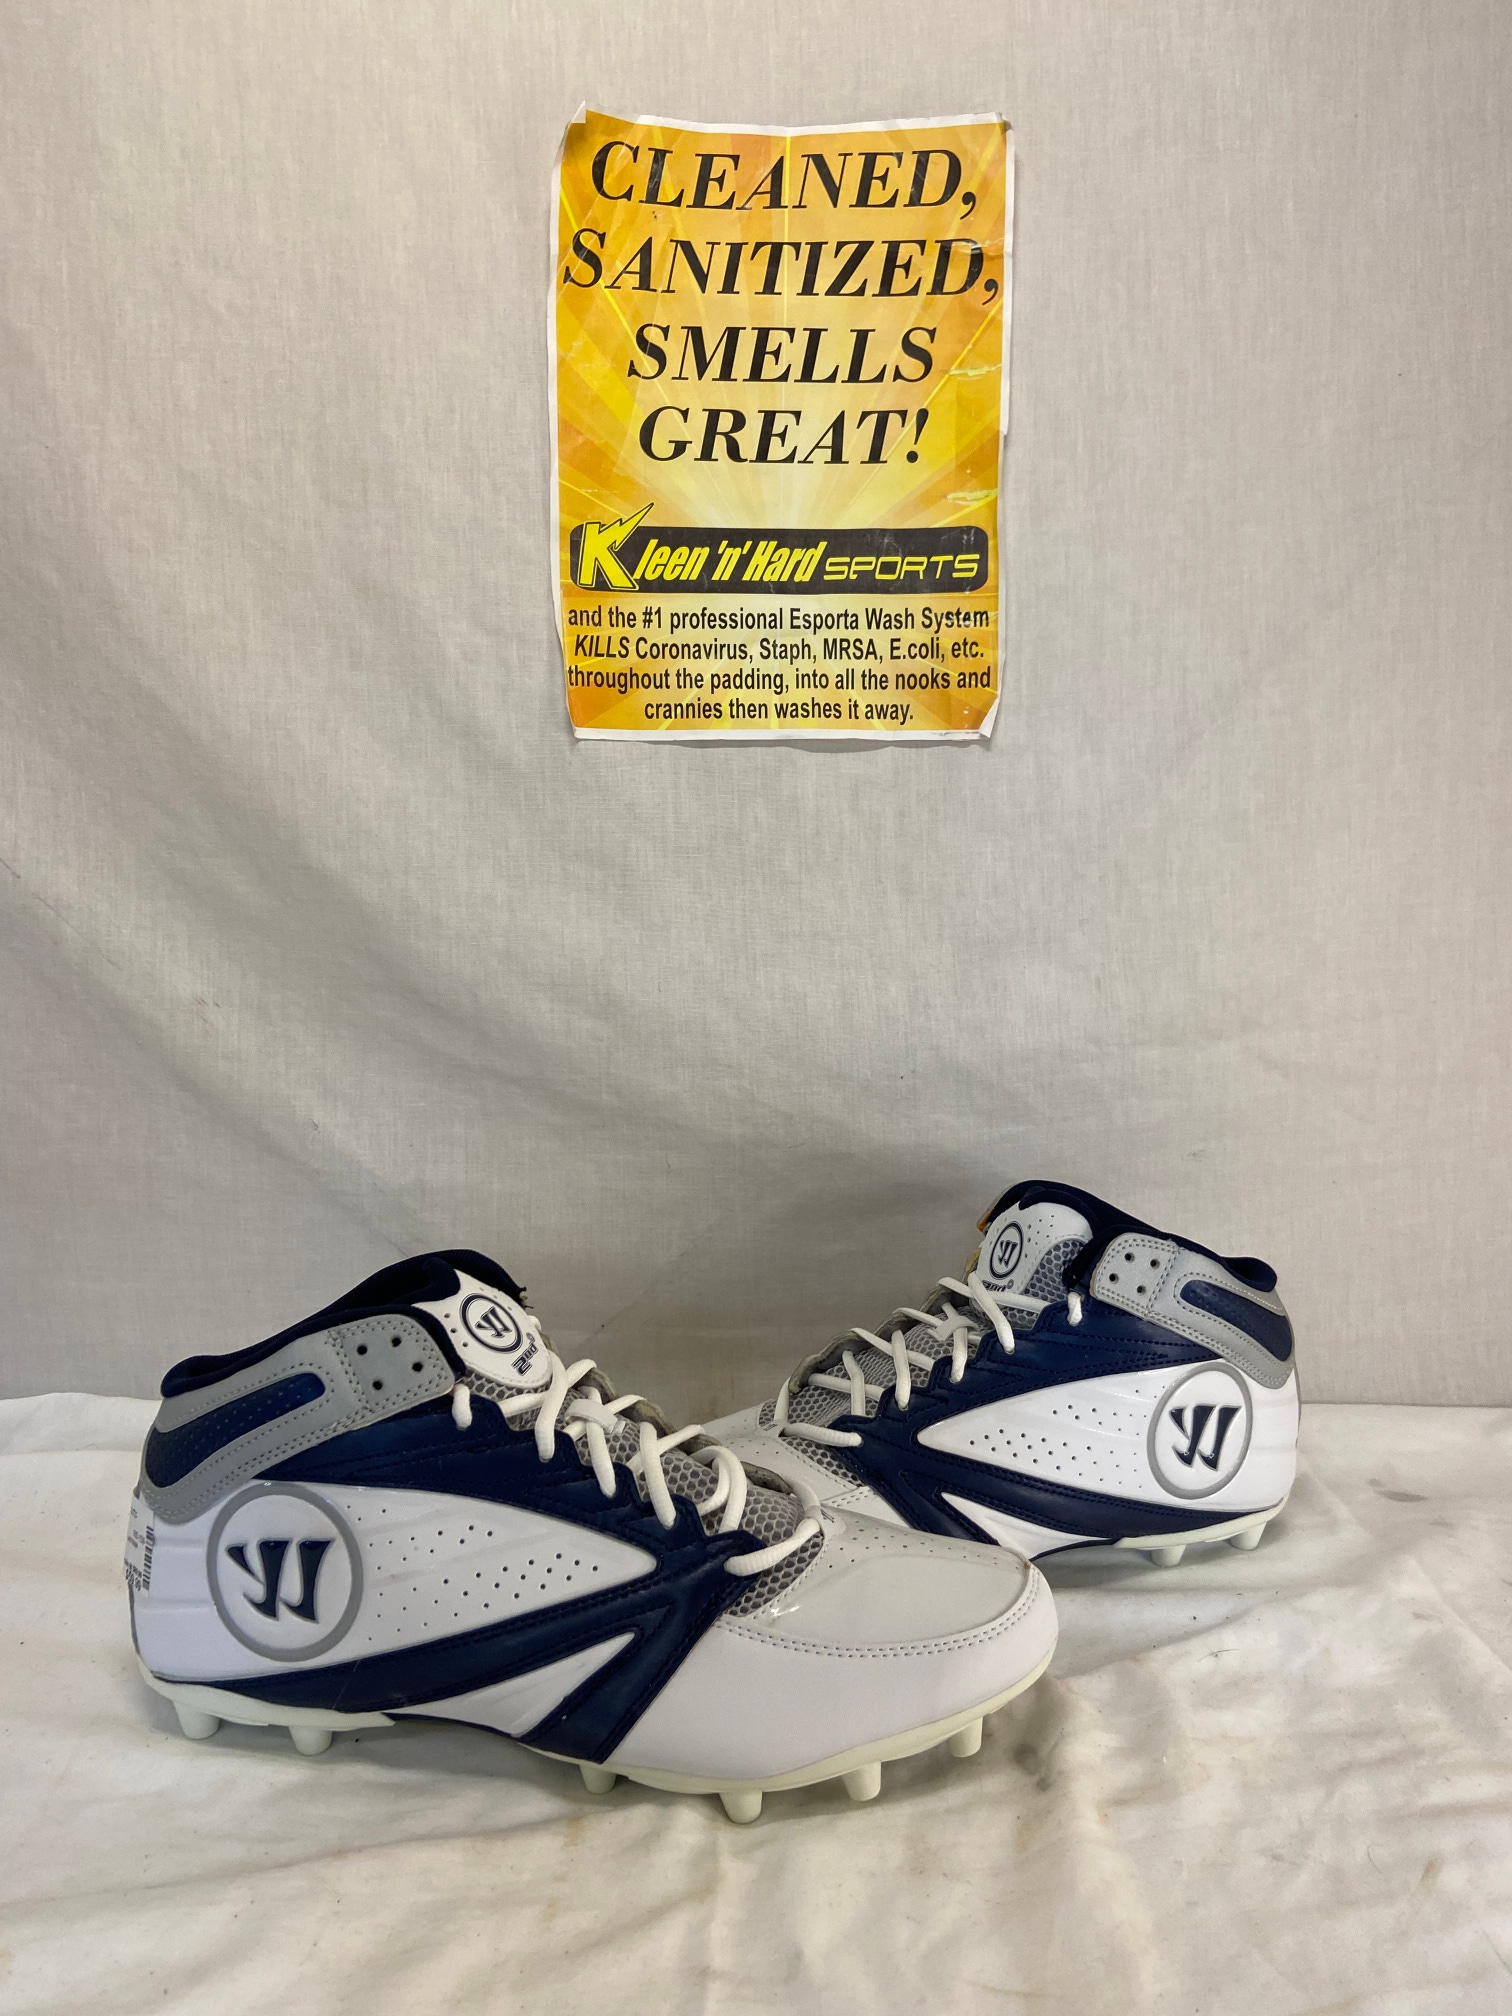 New Blue and White Warrior High Top Adult New Men's Size 13  Molded Cleats